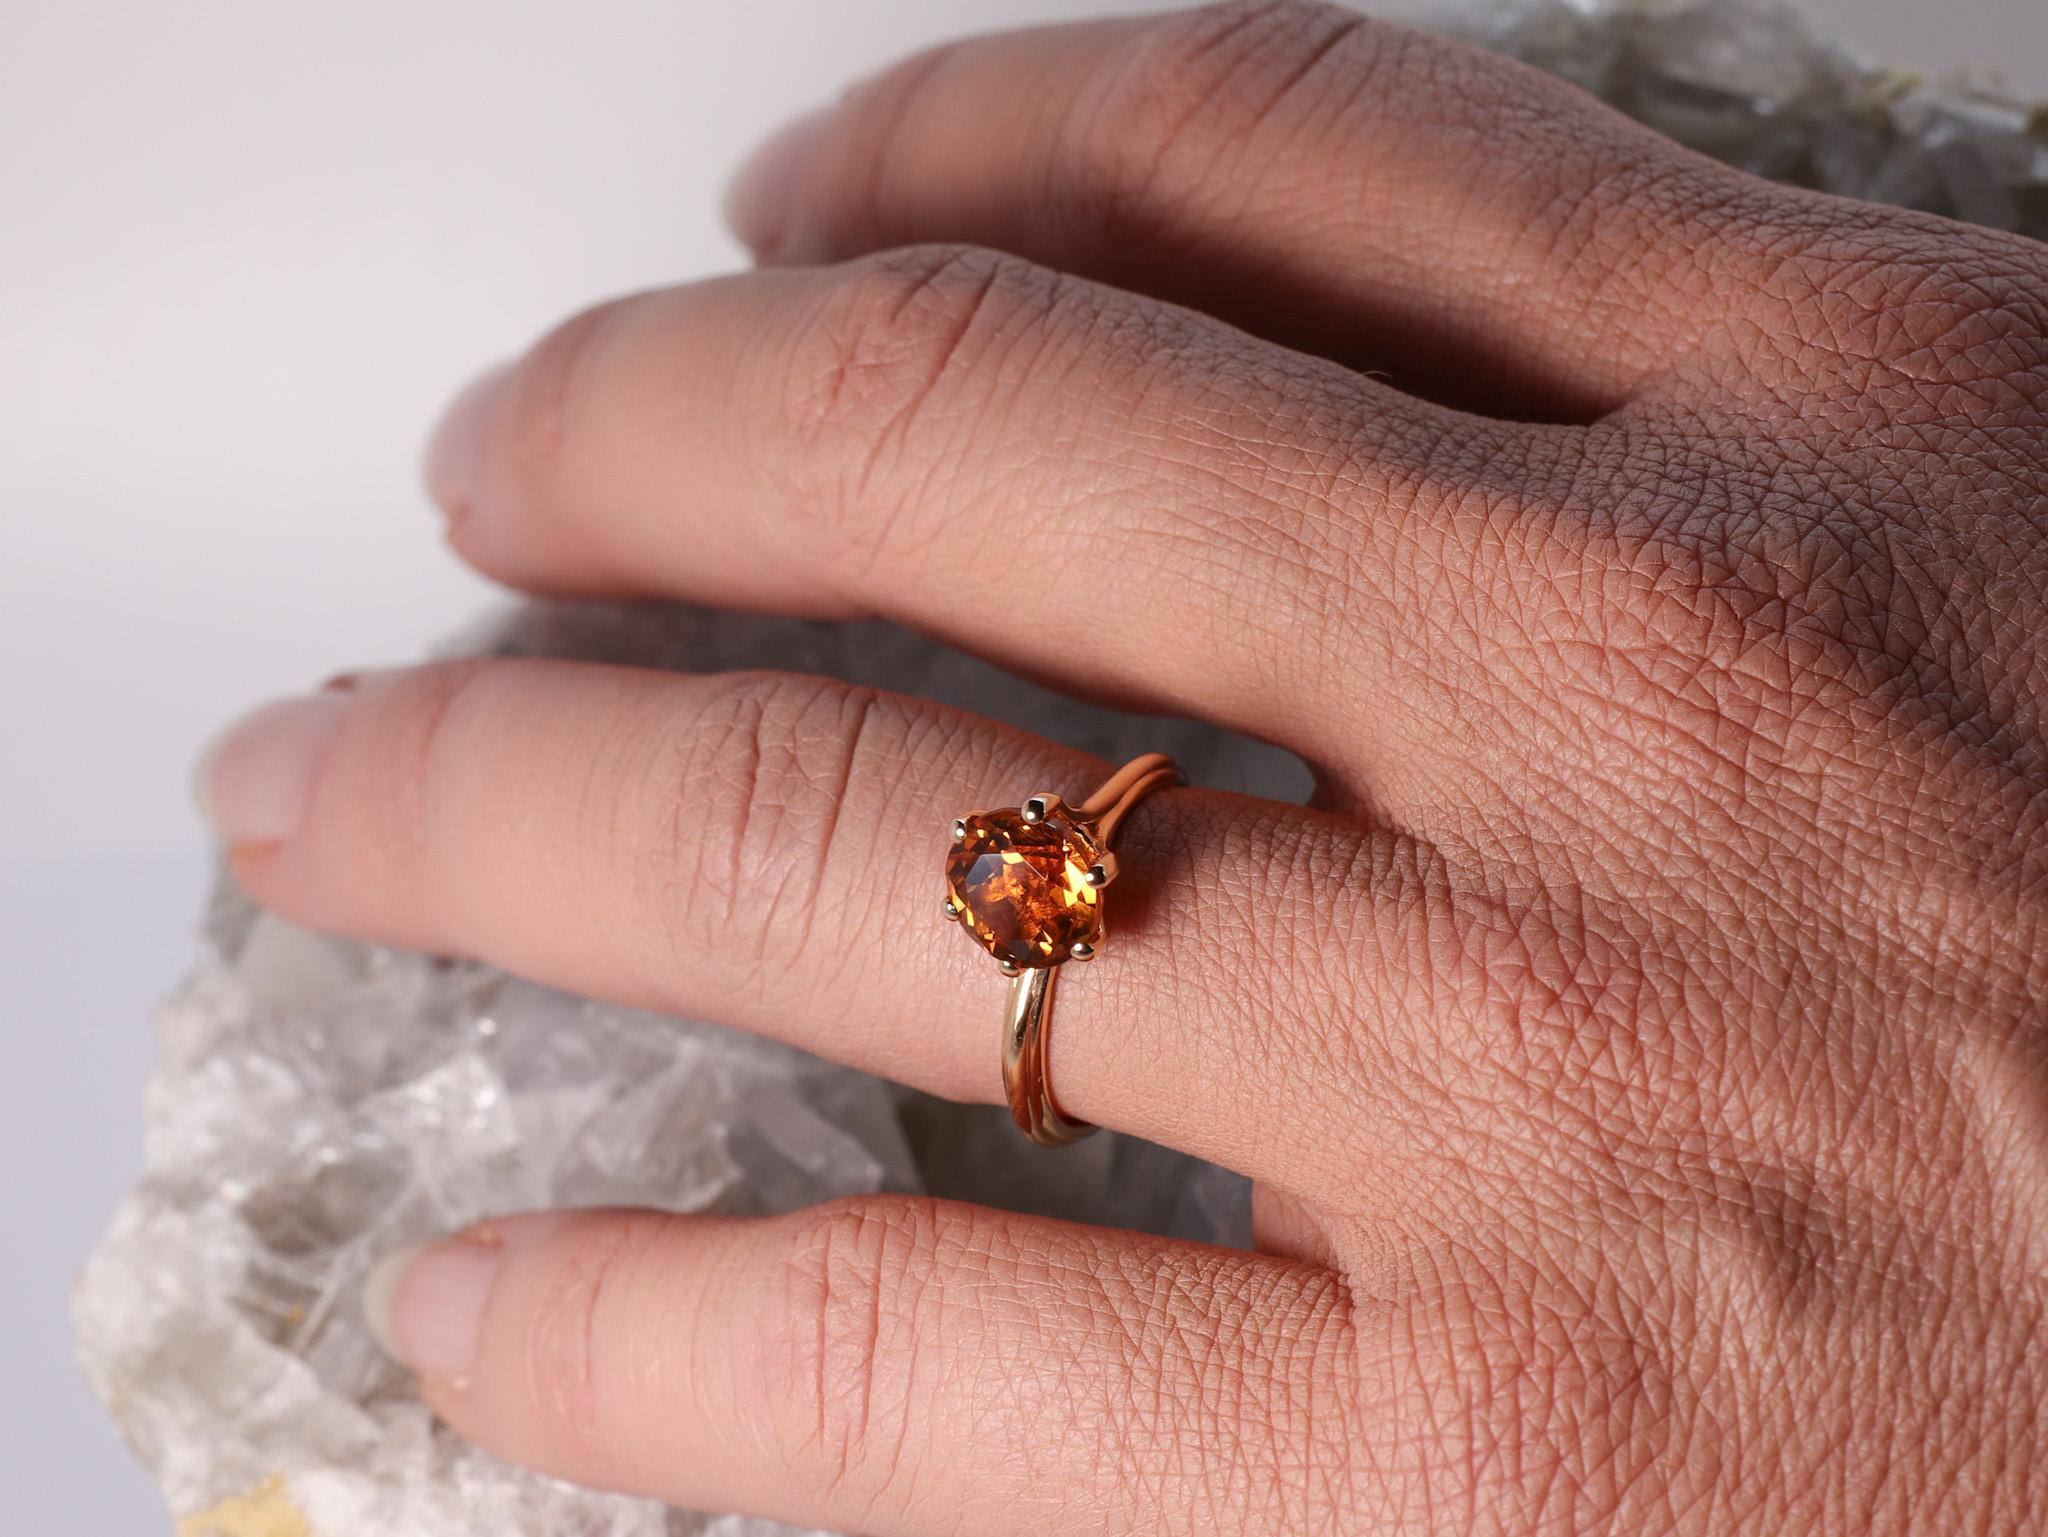 18K Rose Gold Asymmetric Cosmic Design Stackable Citrine Quartz Cocktail Ring.
The Egle ring is made of 18 karat  yellow gold and features a round mixed cut natural citrine quartz around 2.09 carats, diameter 7.95 mm. The total weight of the ring is